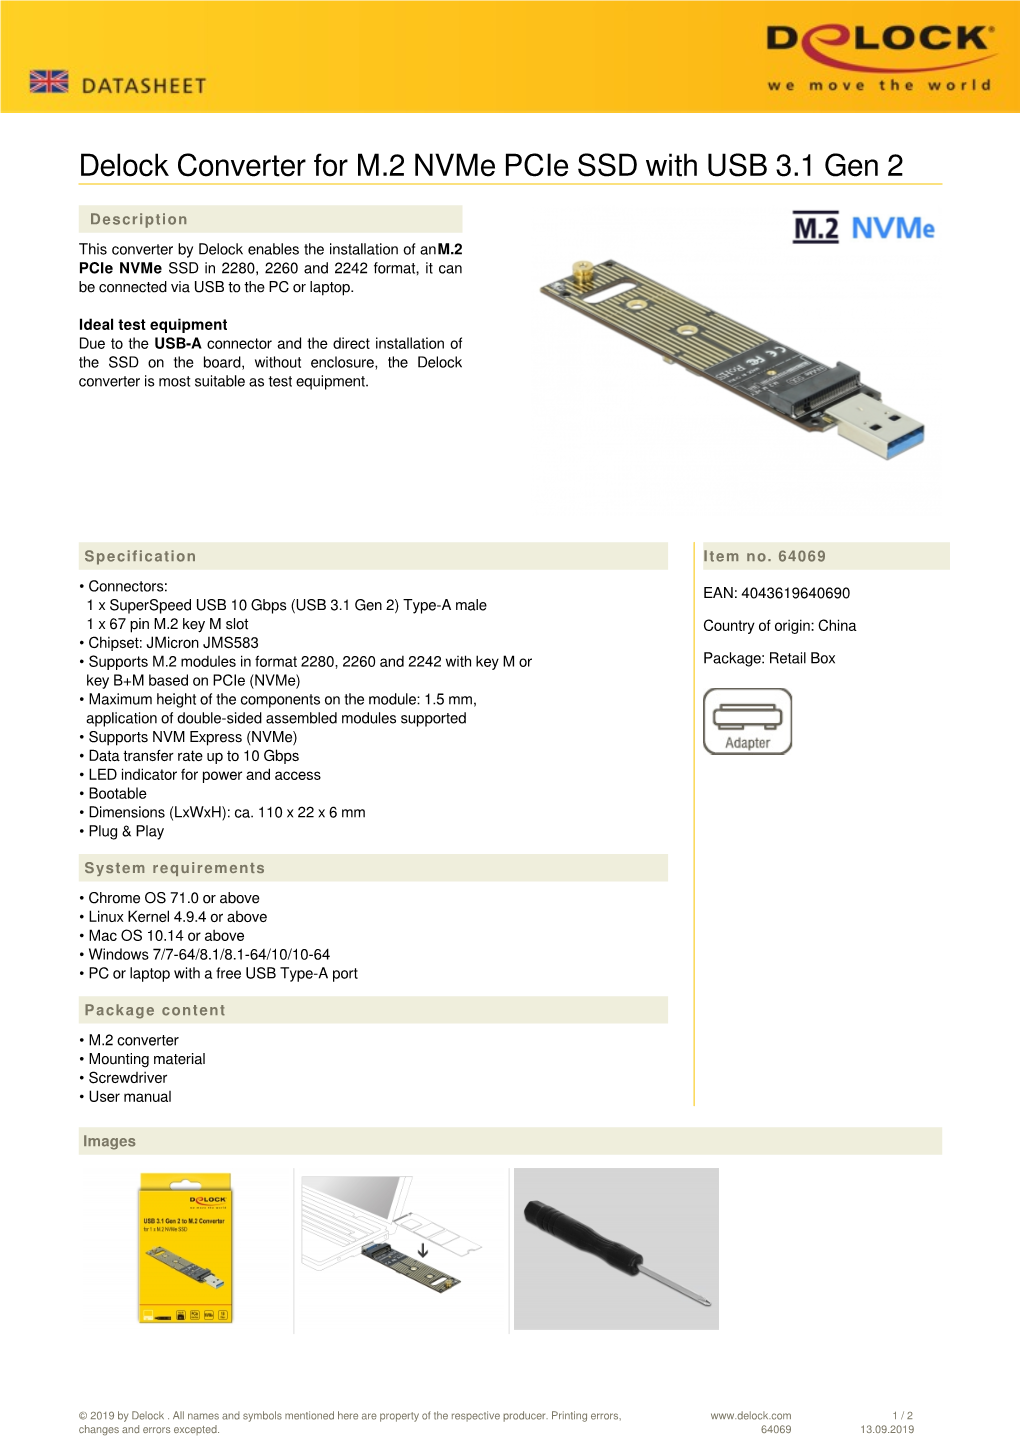 Delock Converter for M.2 Nvme Pcie SSD with USB 3.1 Gen 2